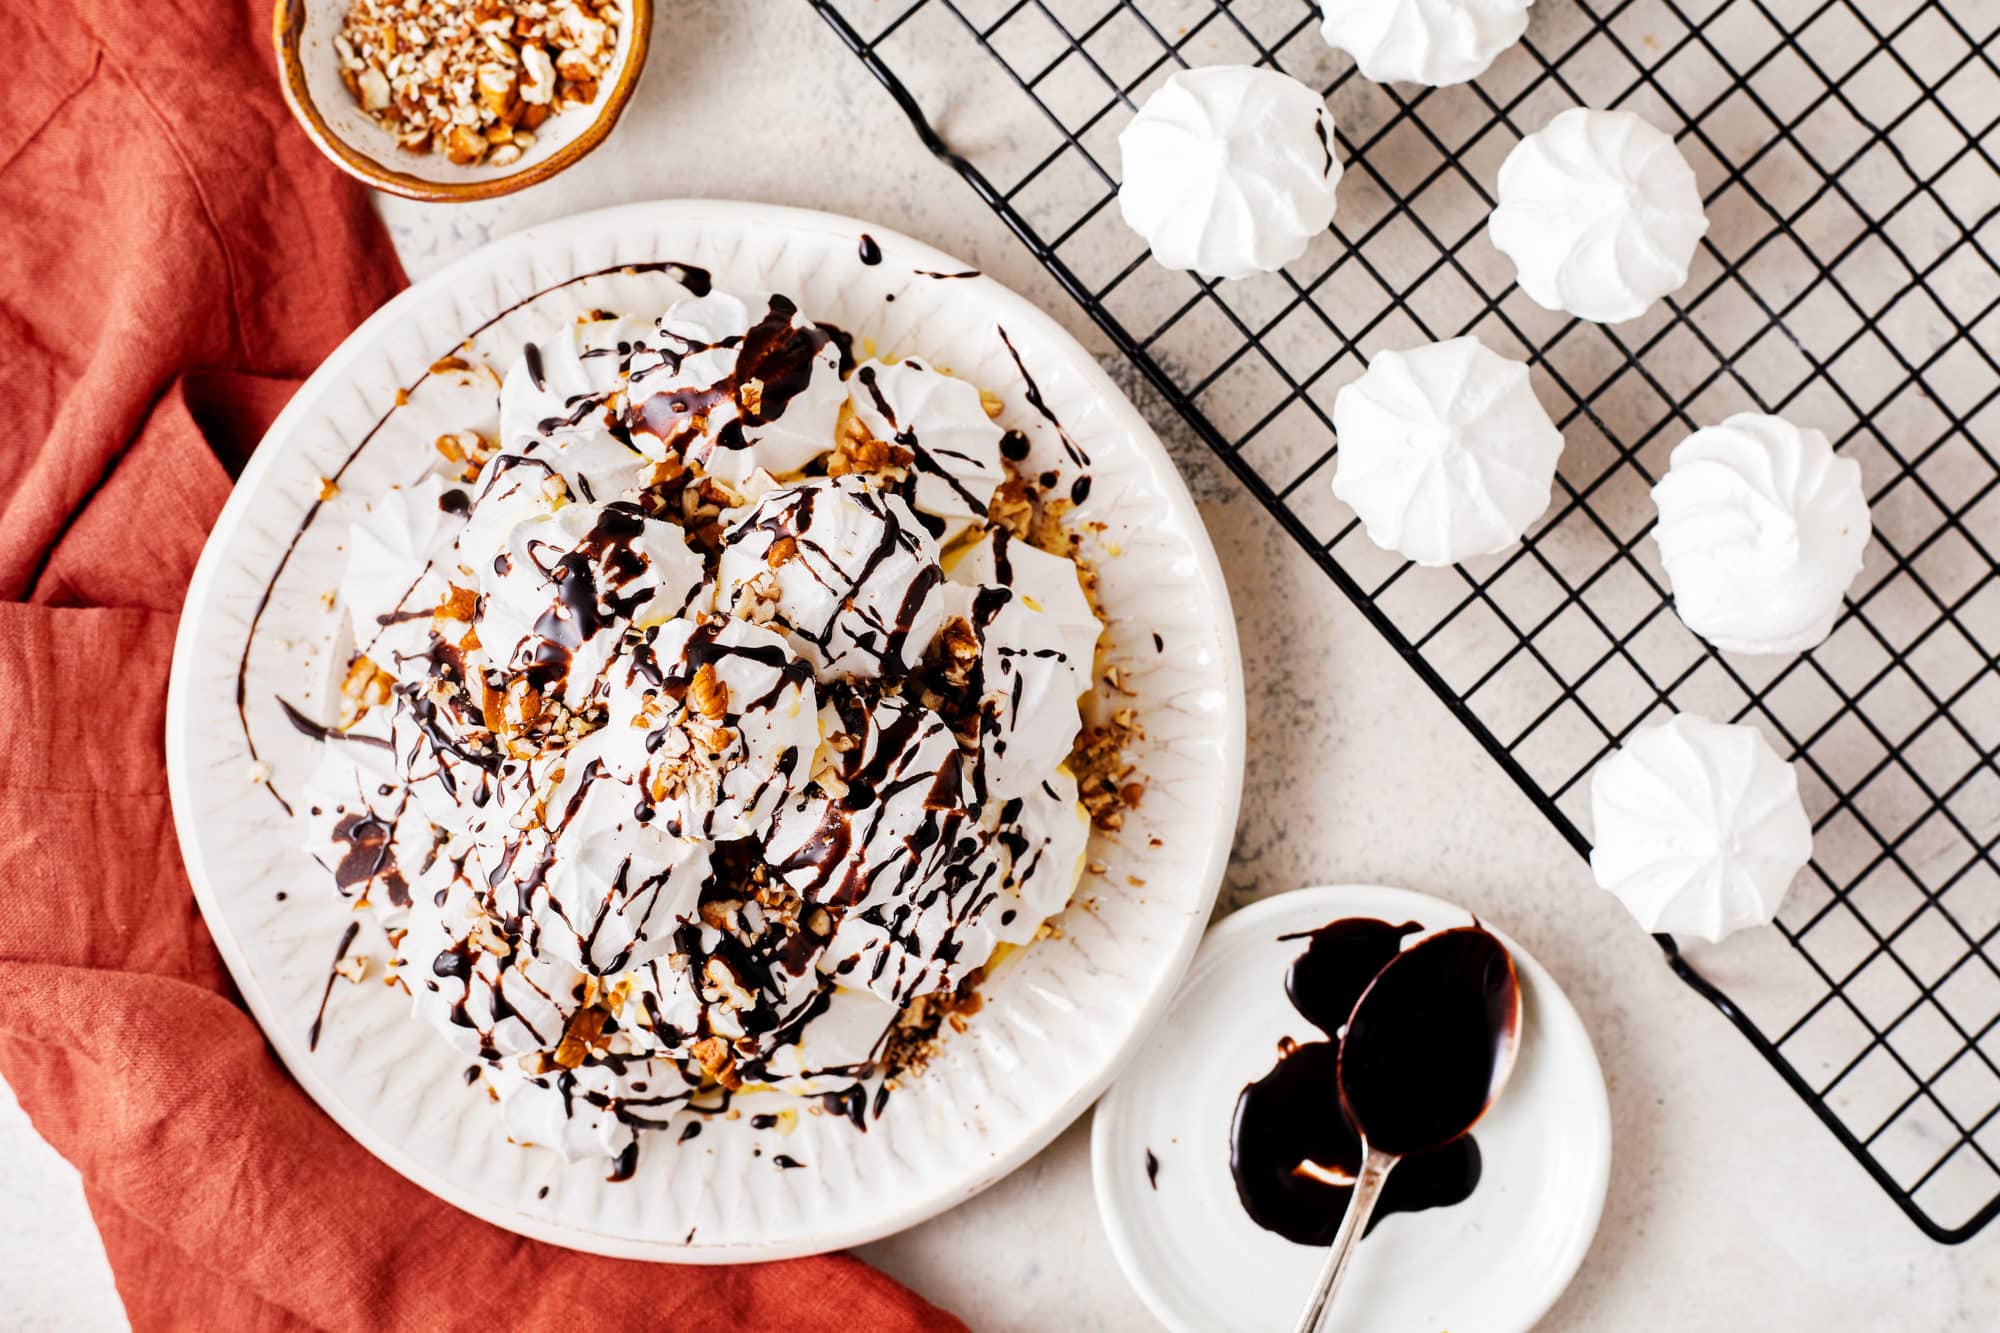 a stack of meringues on a white plate with each layer drizzled in custard cream chocolate glaze and chopped pecans with additional meringues chopped pecans and chocolate on the side on a wire rack and an orange towel.